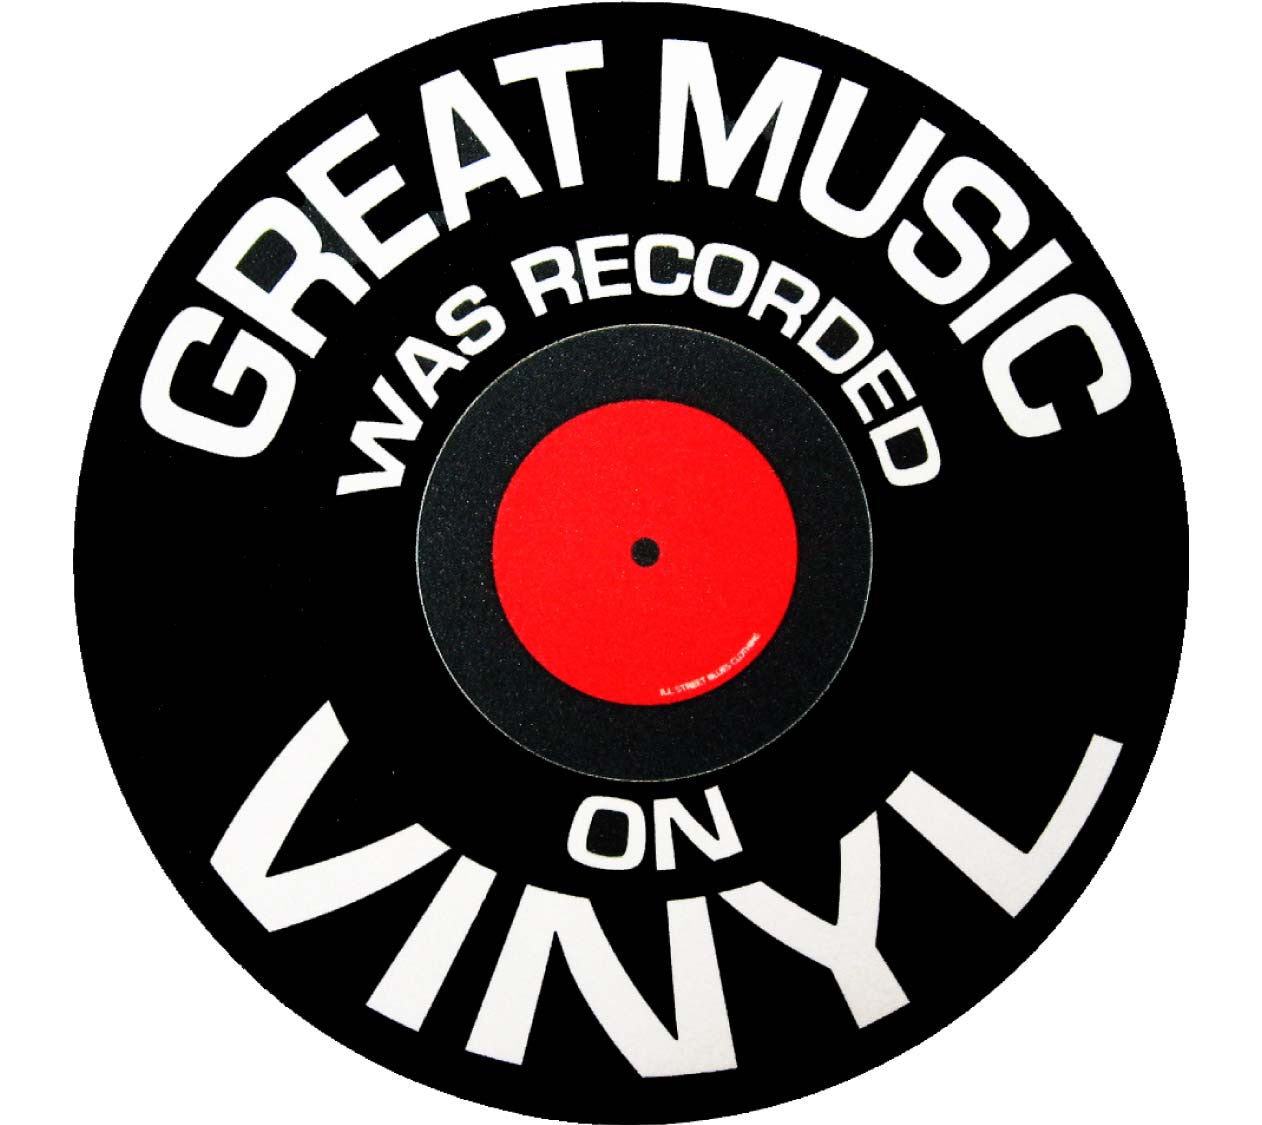 Great Music was Recorded on Vinyl Mousepad